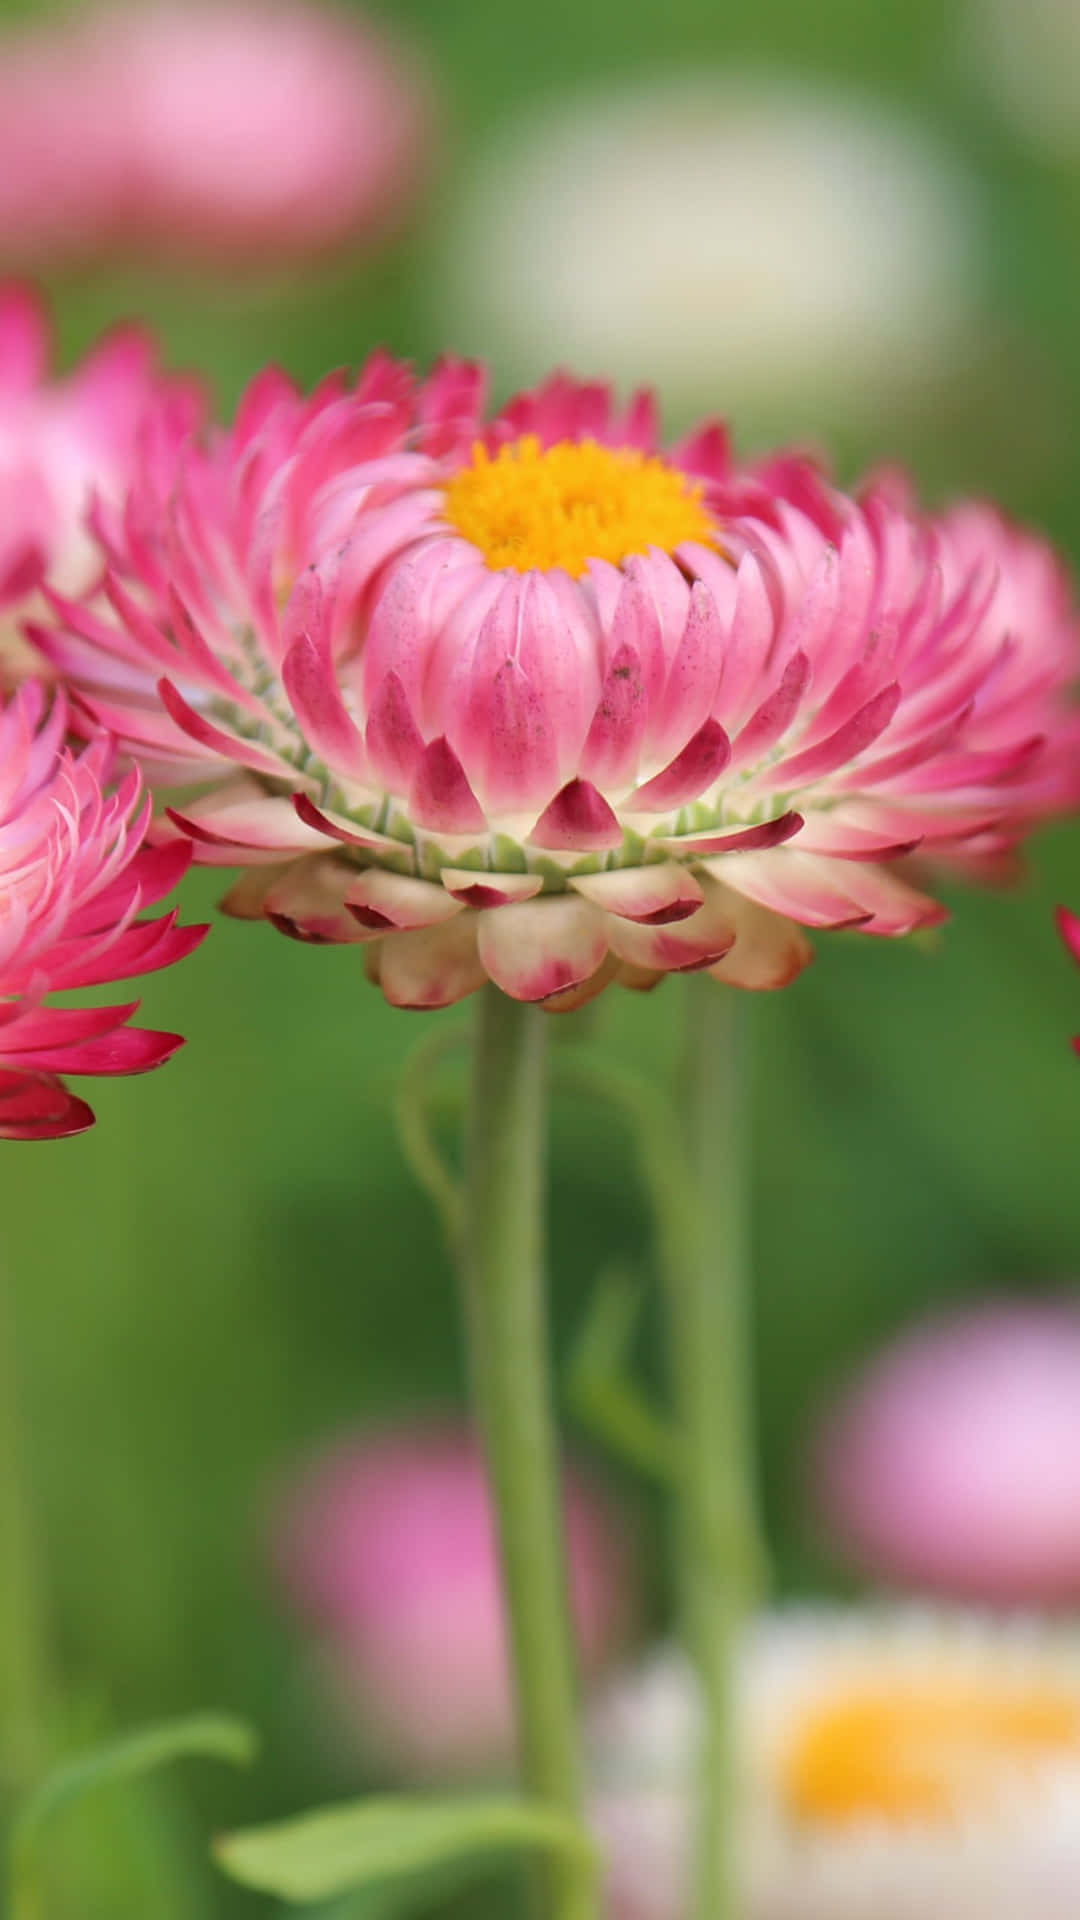 A beautiful pink flower takes center stage in this stunning wallpaper